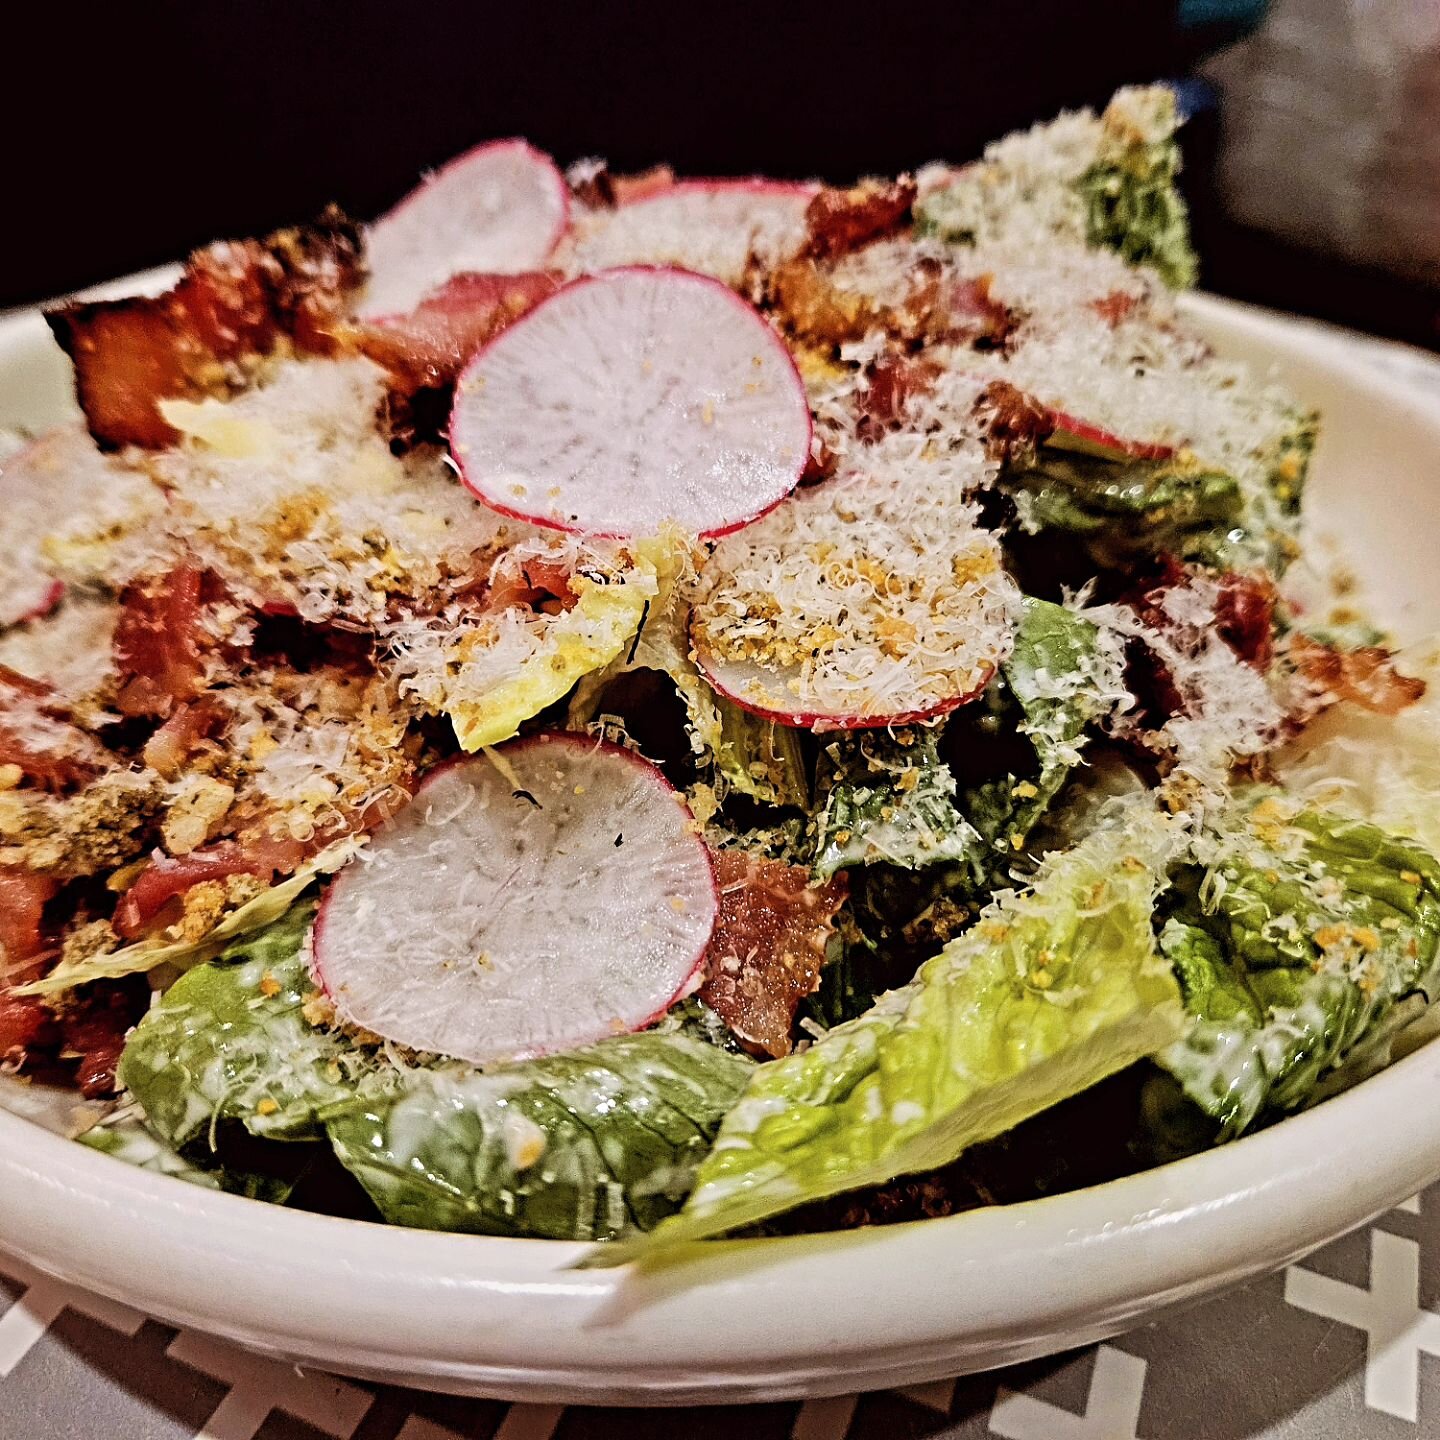 This is our Canadian style Caesar Salad! 🍁

No egg, no anchovies. Just straight up creamy cheesy goodness 🧀🥬🥓 with a touch of bacon!

Cos lettuce is tossed in our homemade thick &amp; creamy Caesar dressing with maple bacon bits, caper crumb, loa